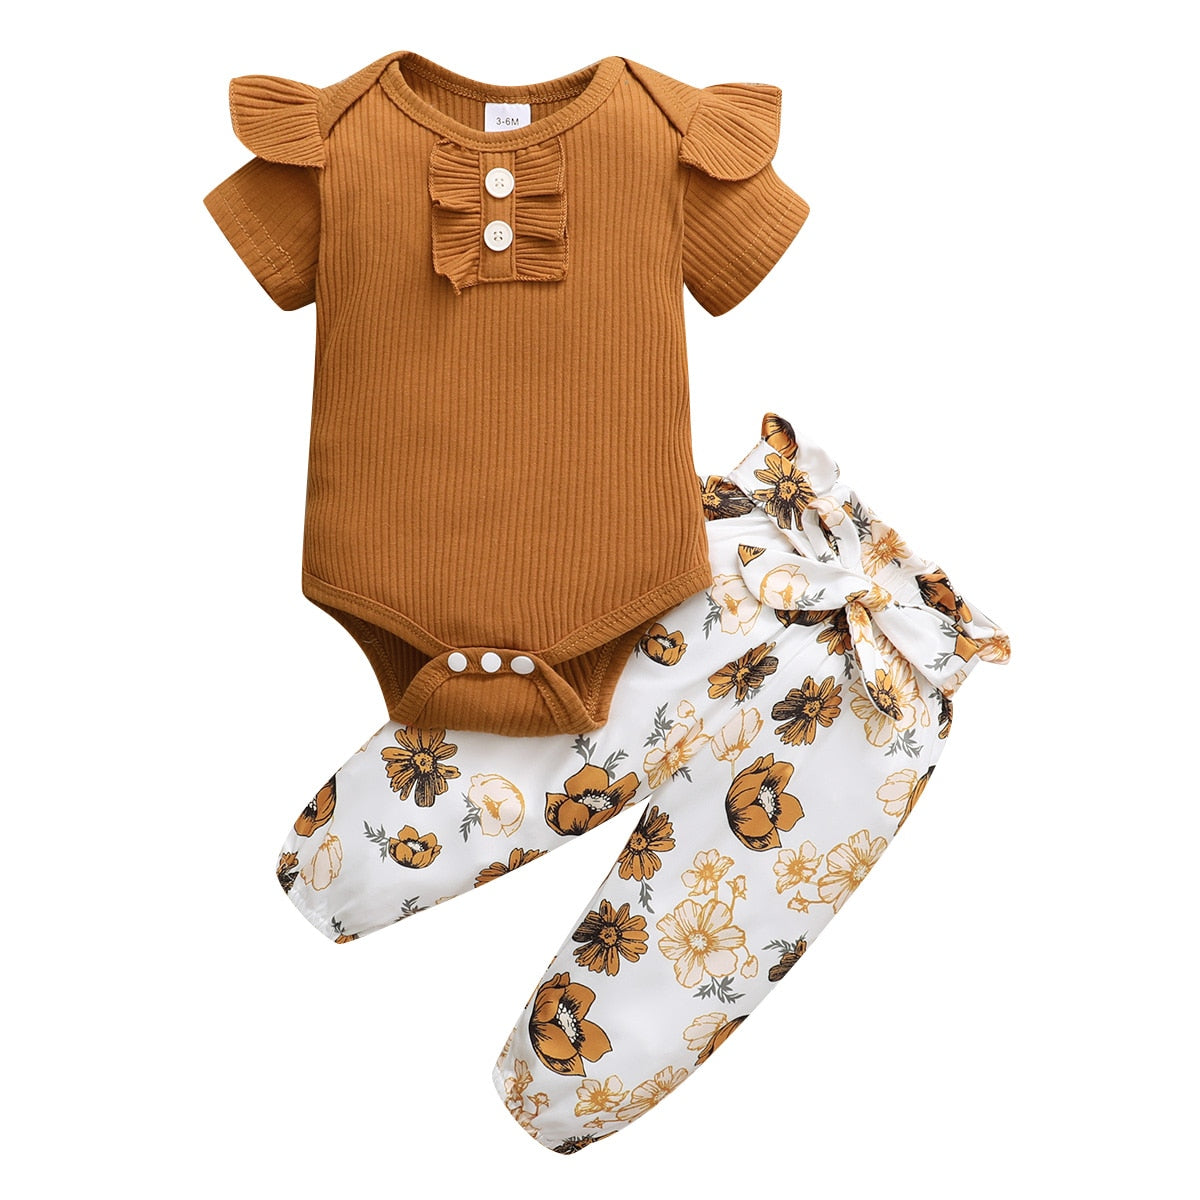 Girls Pant Sets | Adorable Floral Pants with Plain Onesies itsykitschycoo